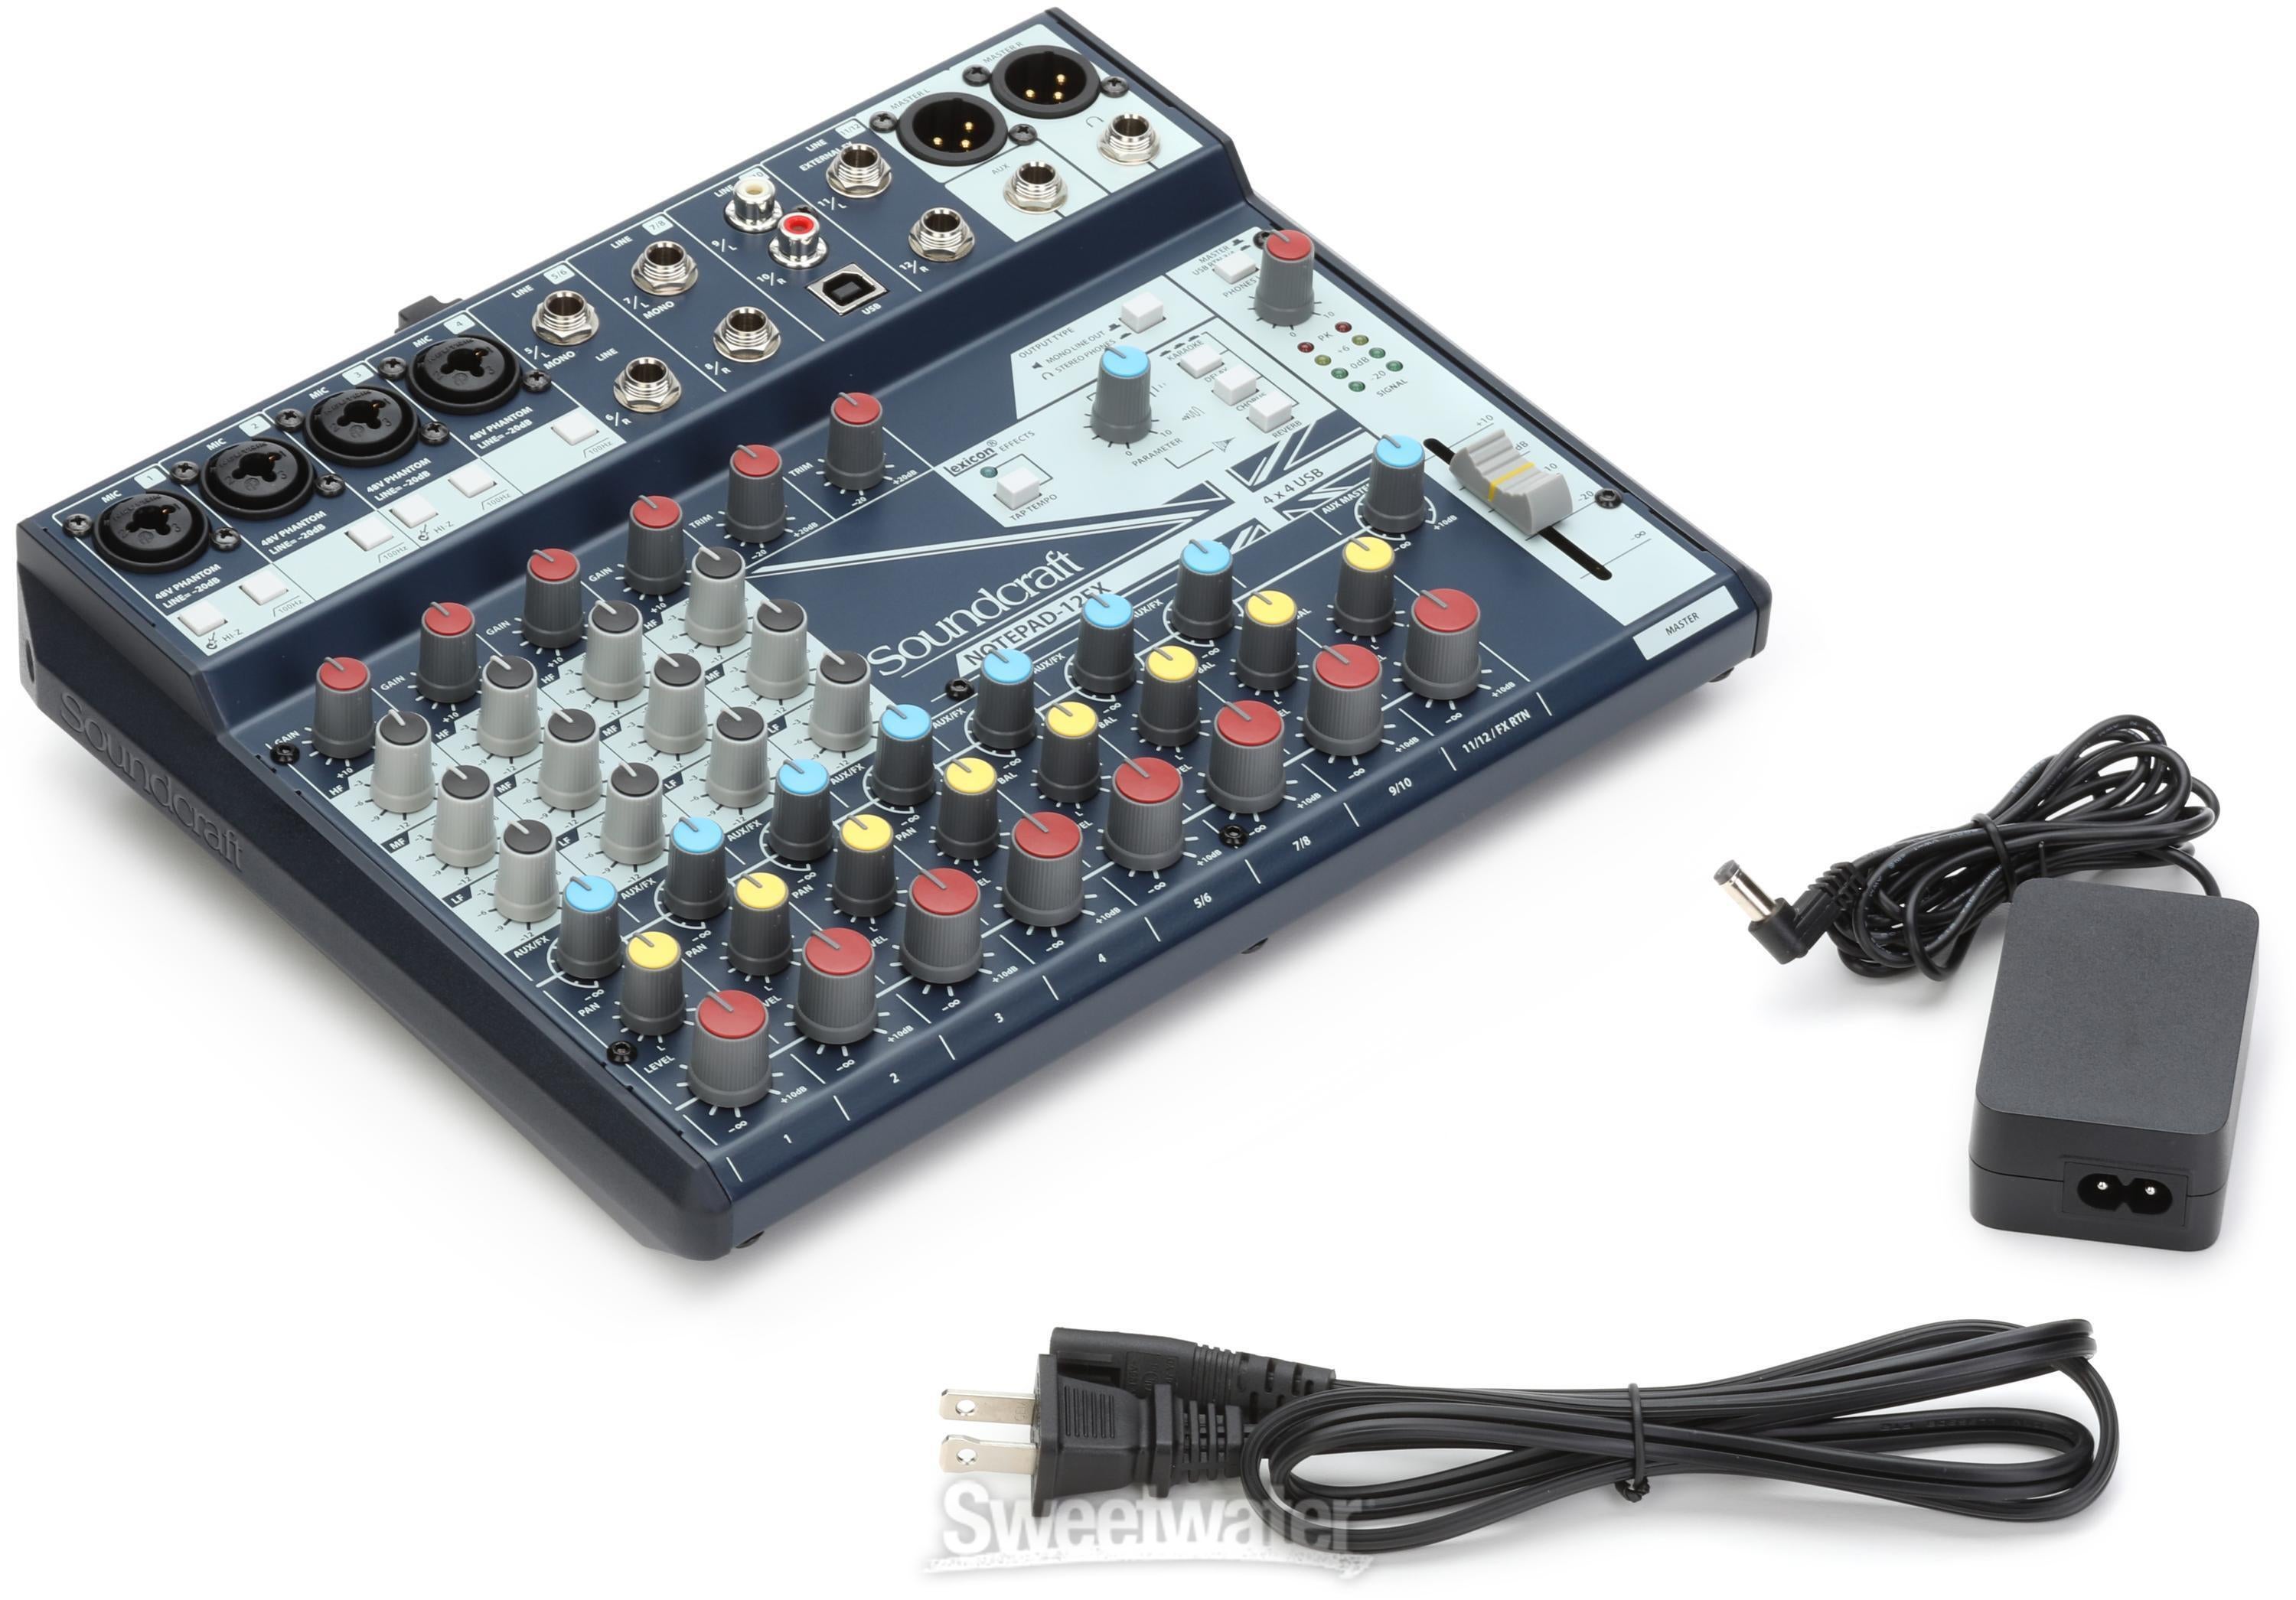 Soundcraft Notepad-12FX Mixer with Effects and USB | Sweetwater